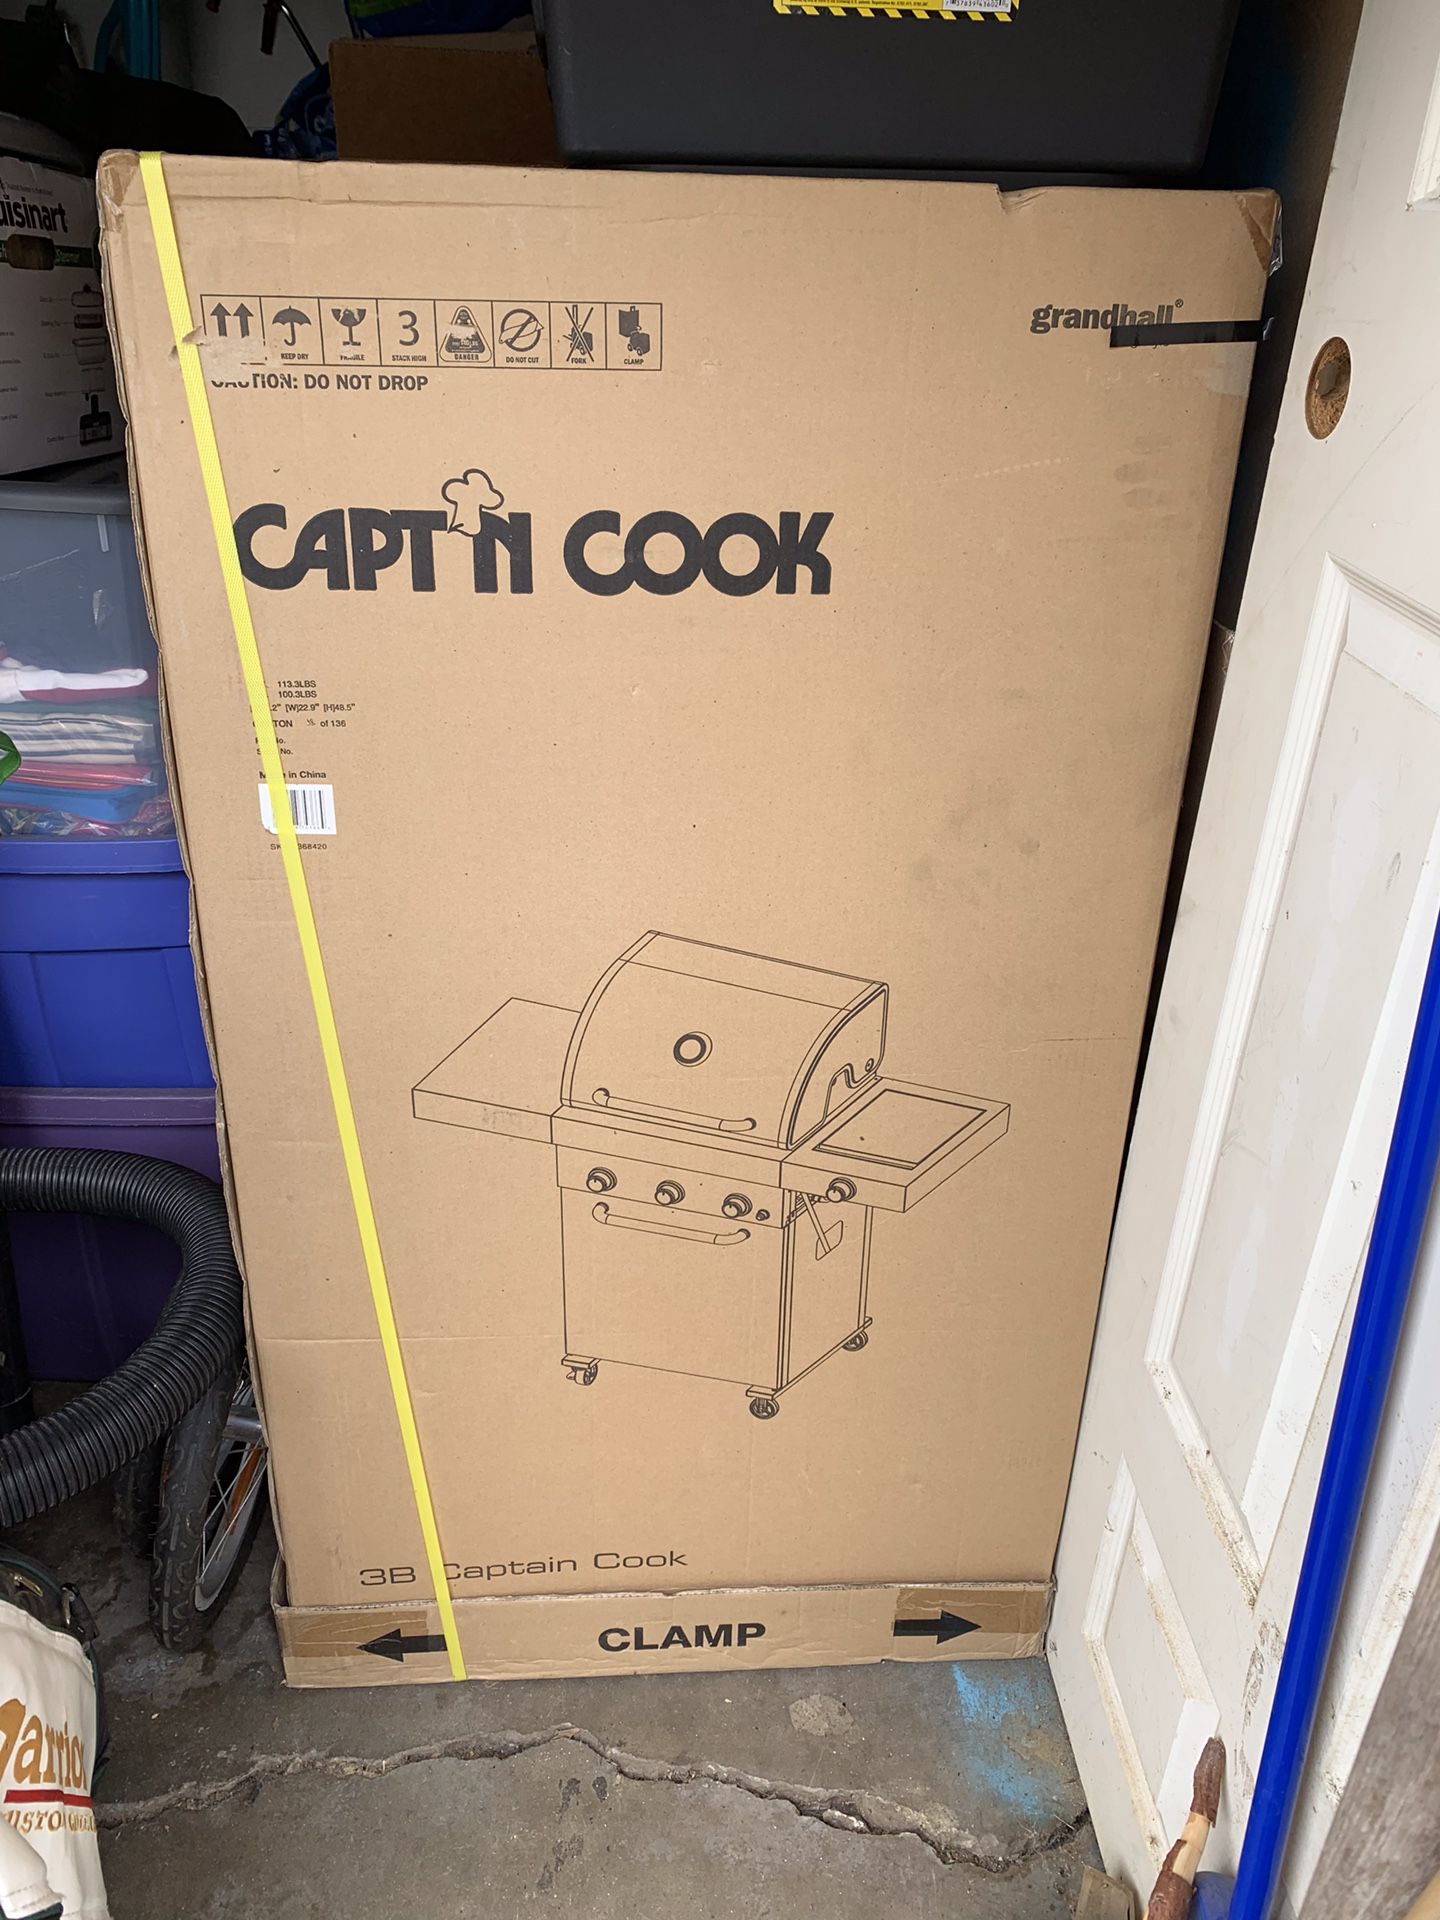 New in box Captn Cook BBQ Grill